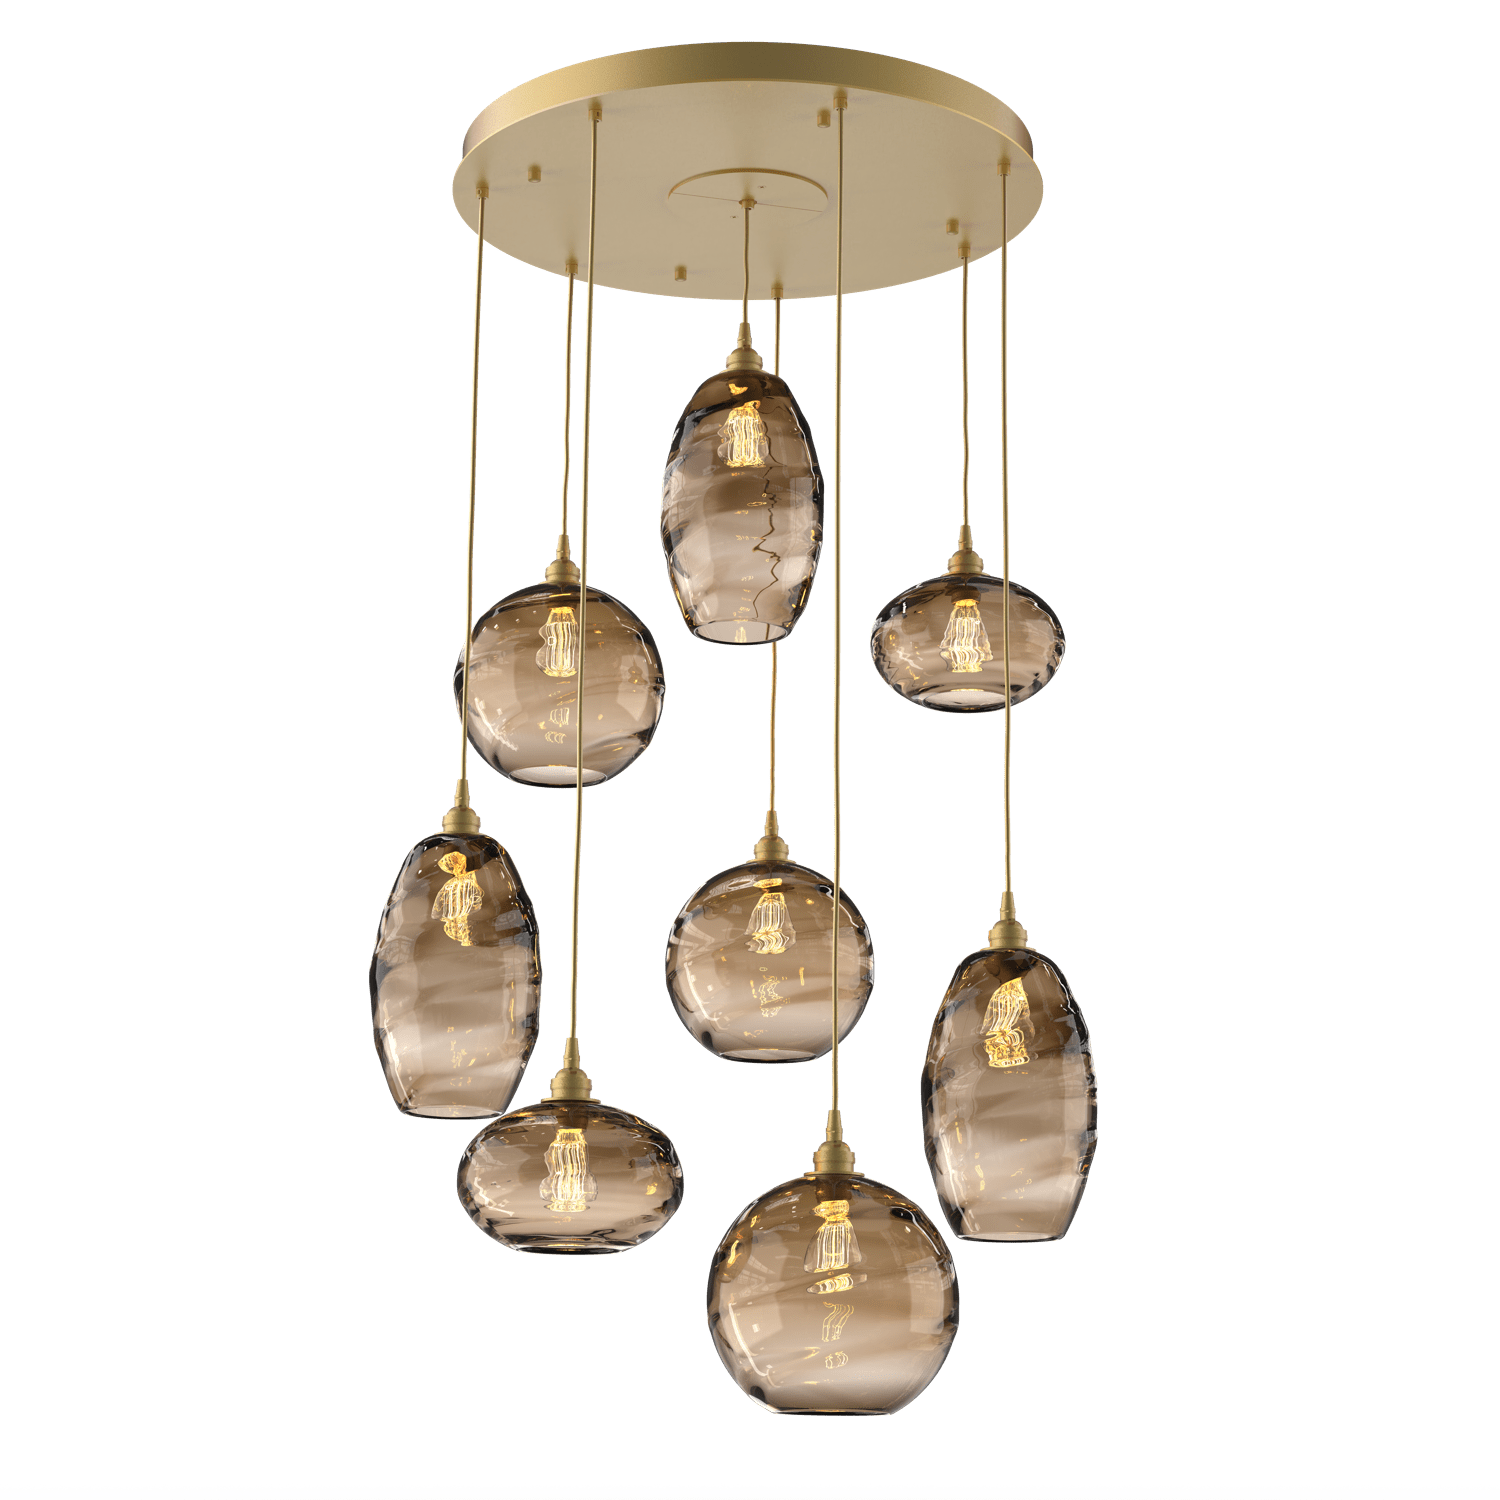 CHB0048-08-GB-OB-Hammerton-Studio-Optic-Blown-Glass-Misto-8-light-round-pendant-chandelier-with-gilded-brass-finish-and-optic-bronze-blown-glass-shades-and-incandescent-lamping